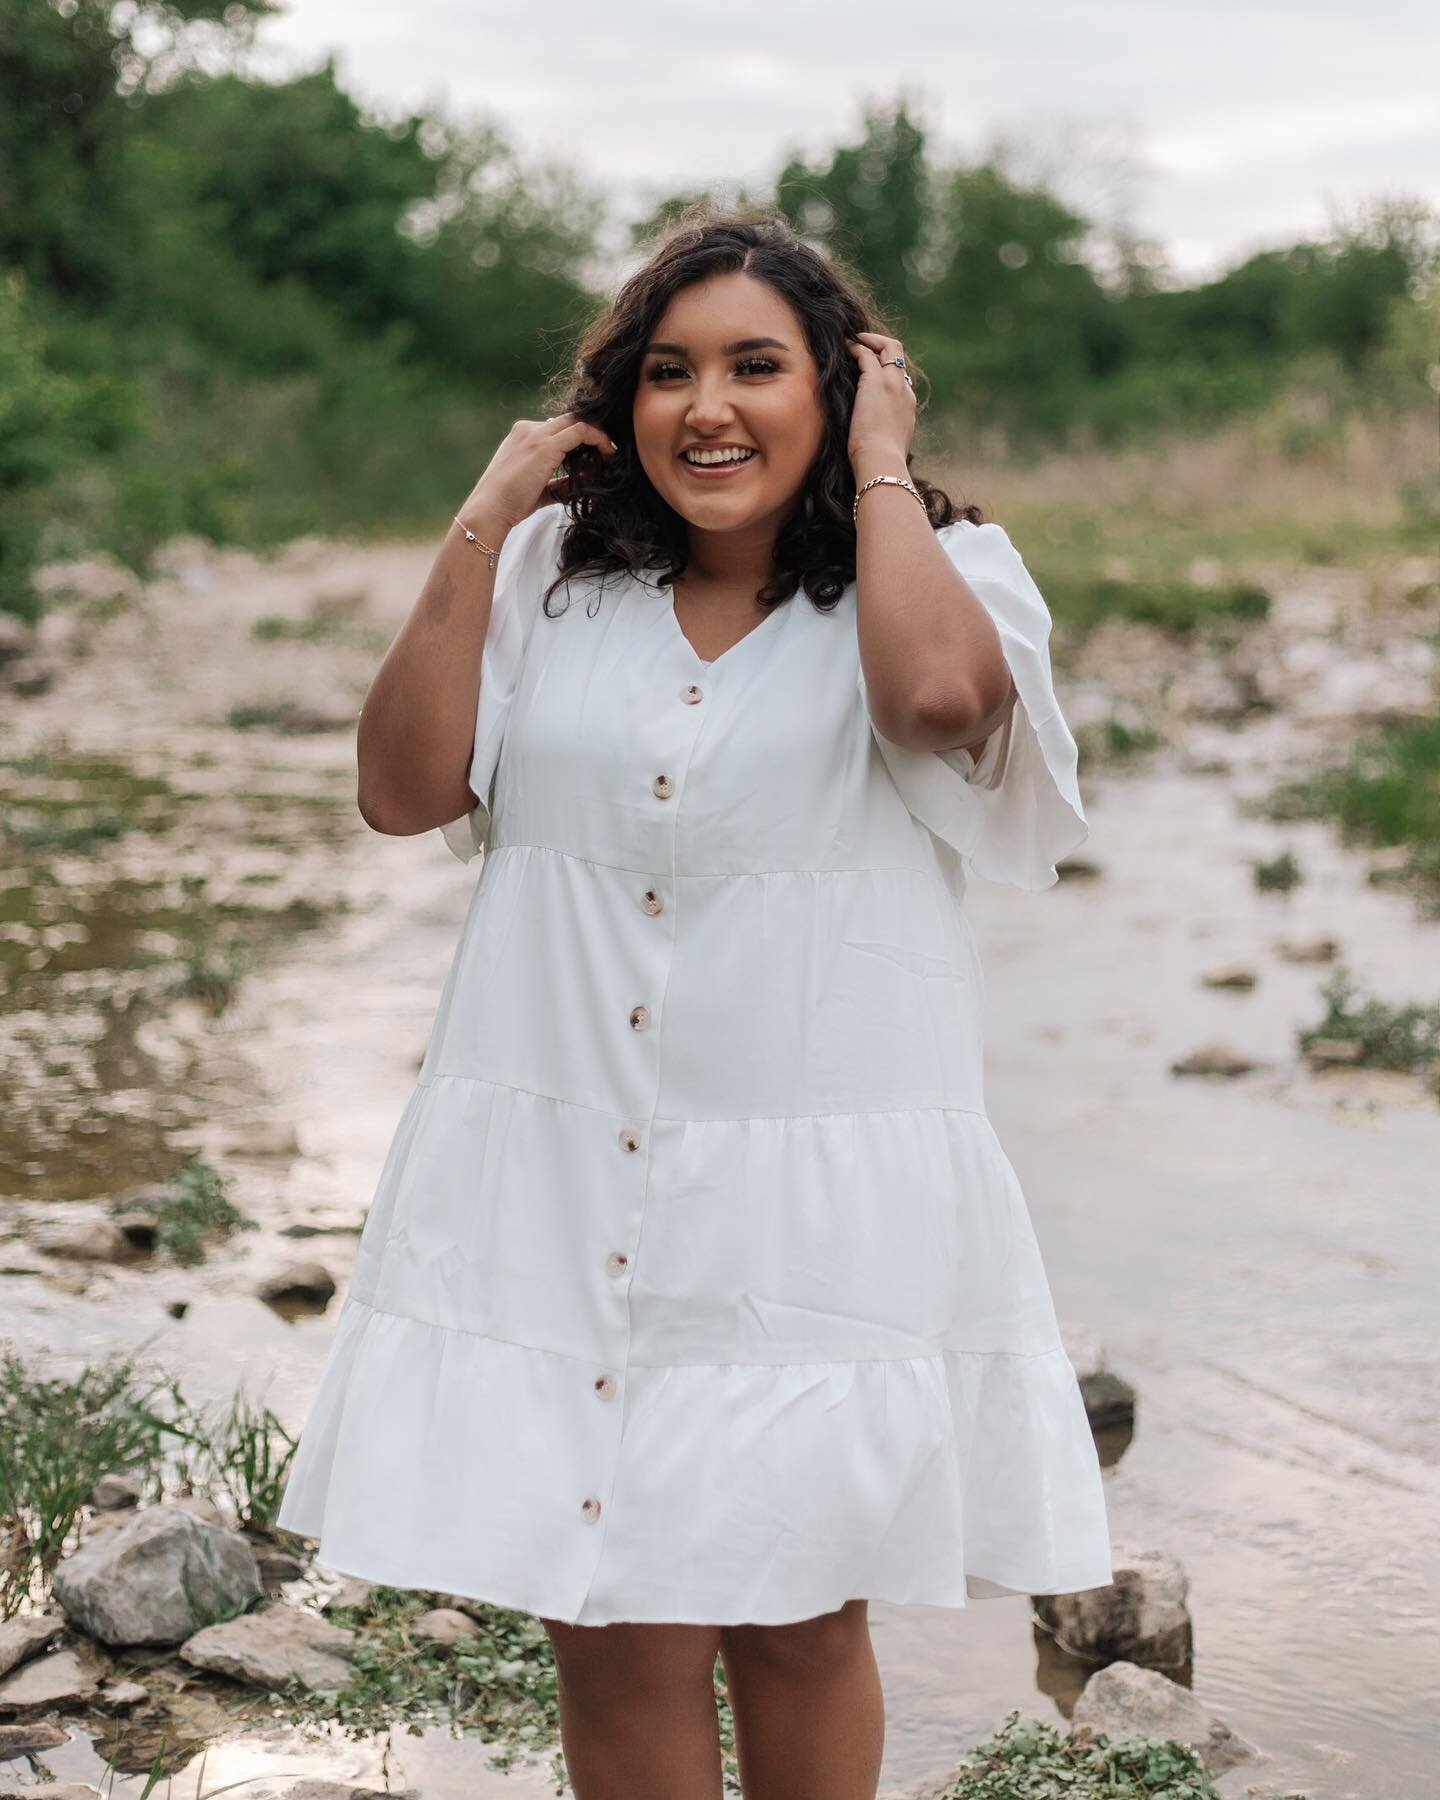 Conversations behind the camera: &ldquo;hey, you want me sing a song for you so you can dance?!&rdquo; @lavidaveraphoto &hellip; making clients feel comfortable since 2018. 😆 #seniorsession
.
.
.
.
Tags. #moodyports #portraitmood #featurepalette #ta